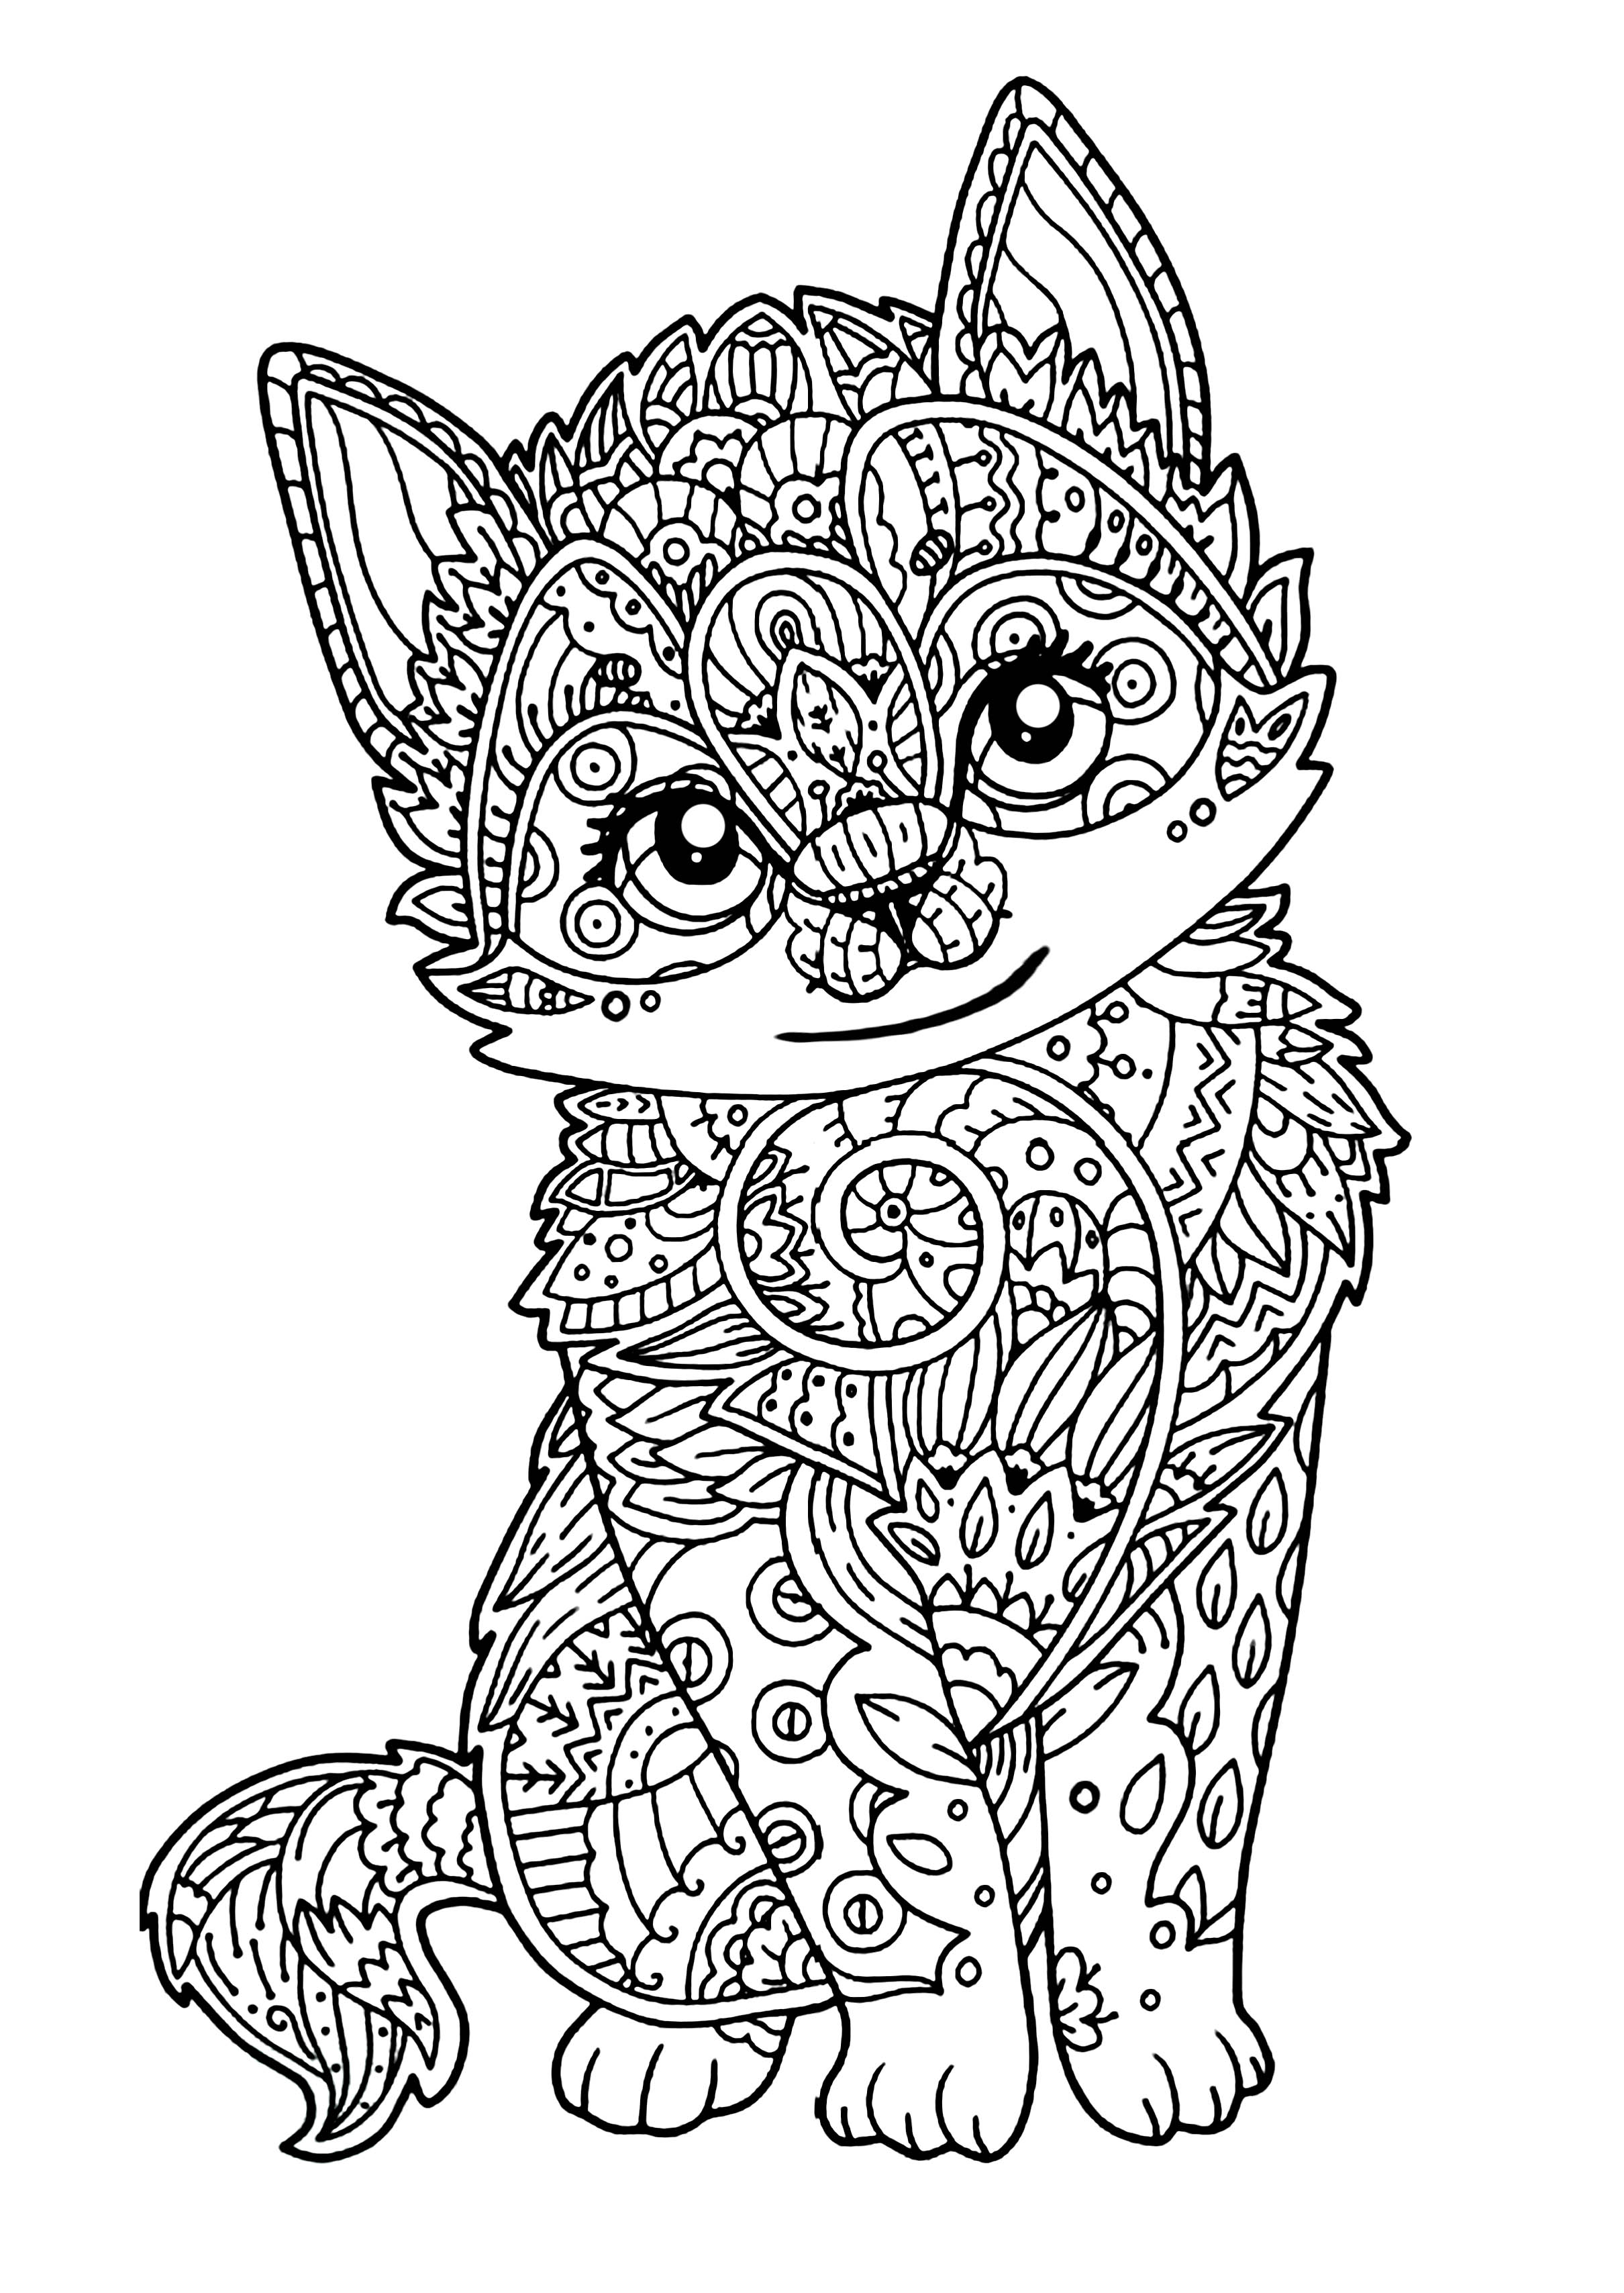 Download Cute Kitten Cats Adult Coloring Pages